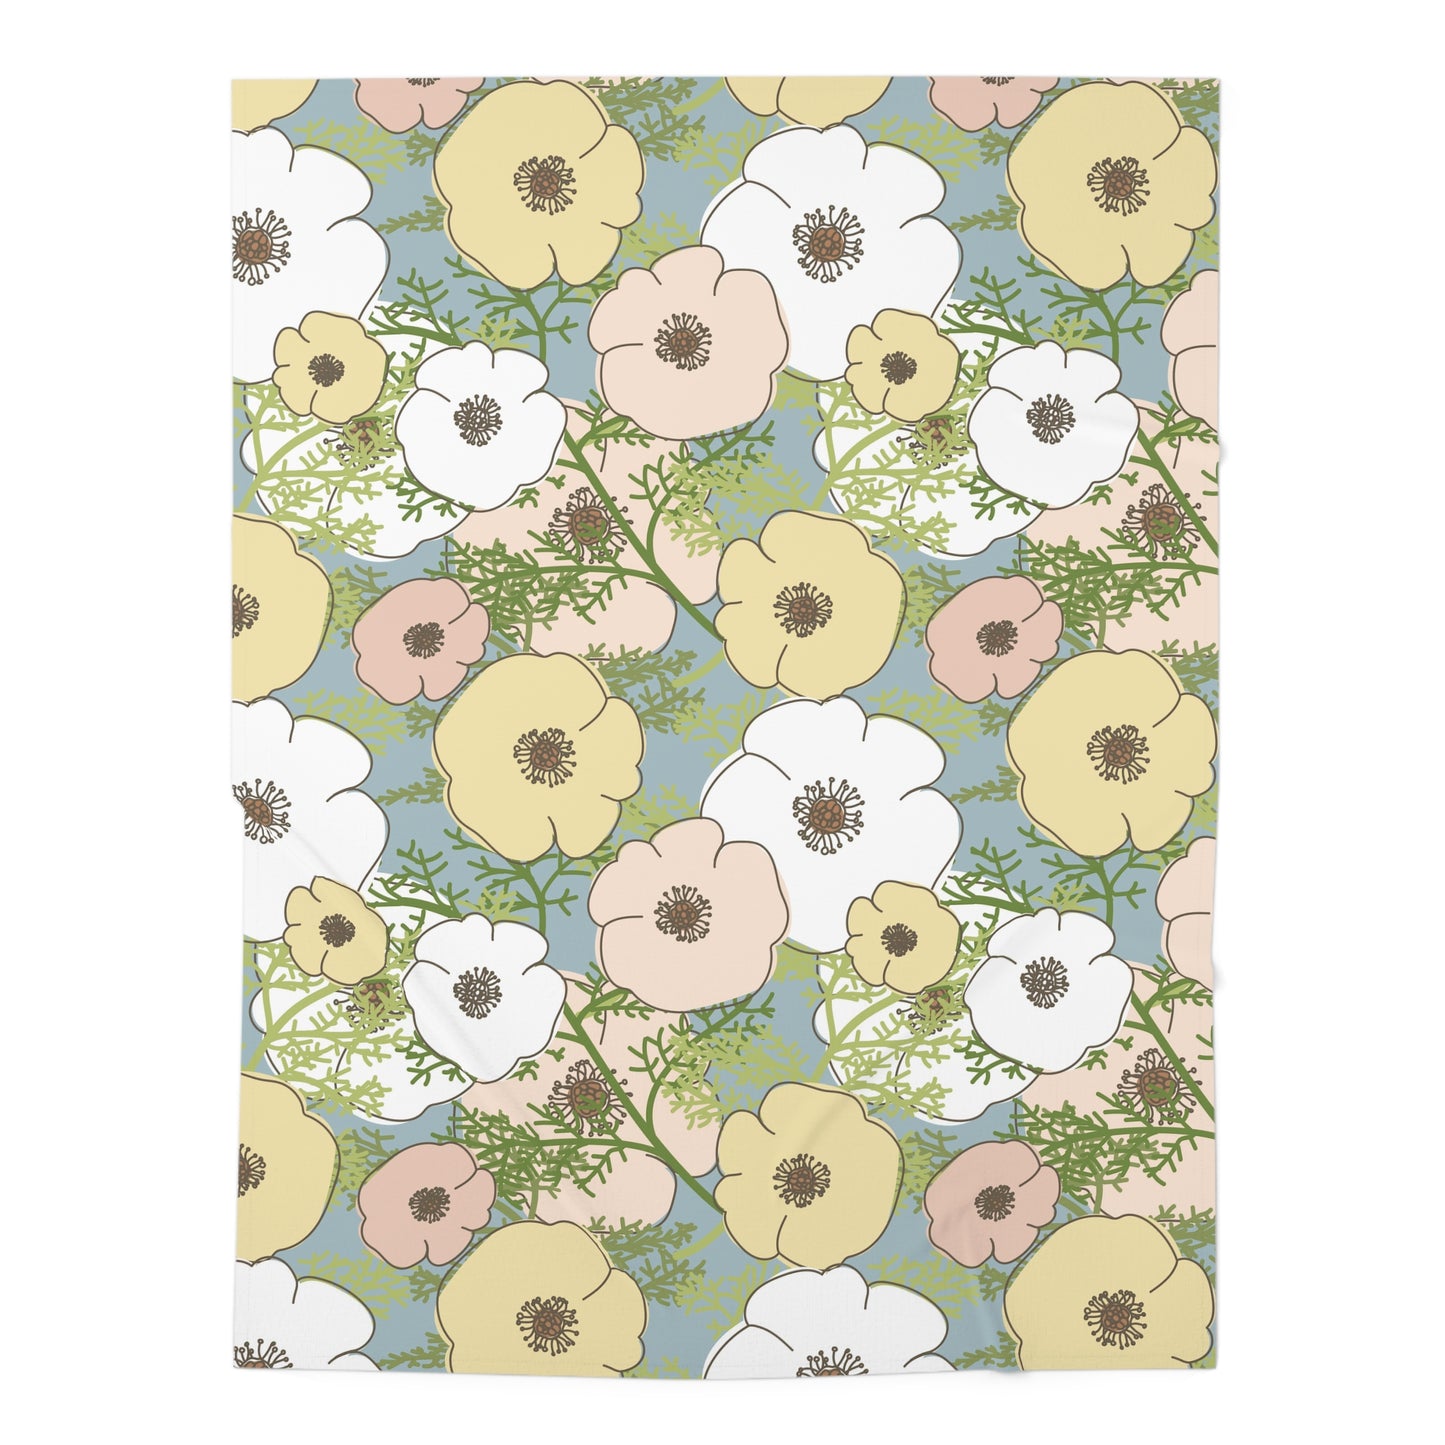 Playful Poppies Baby Swaddle Blanket